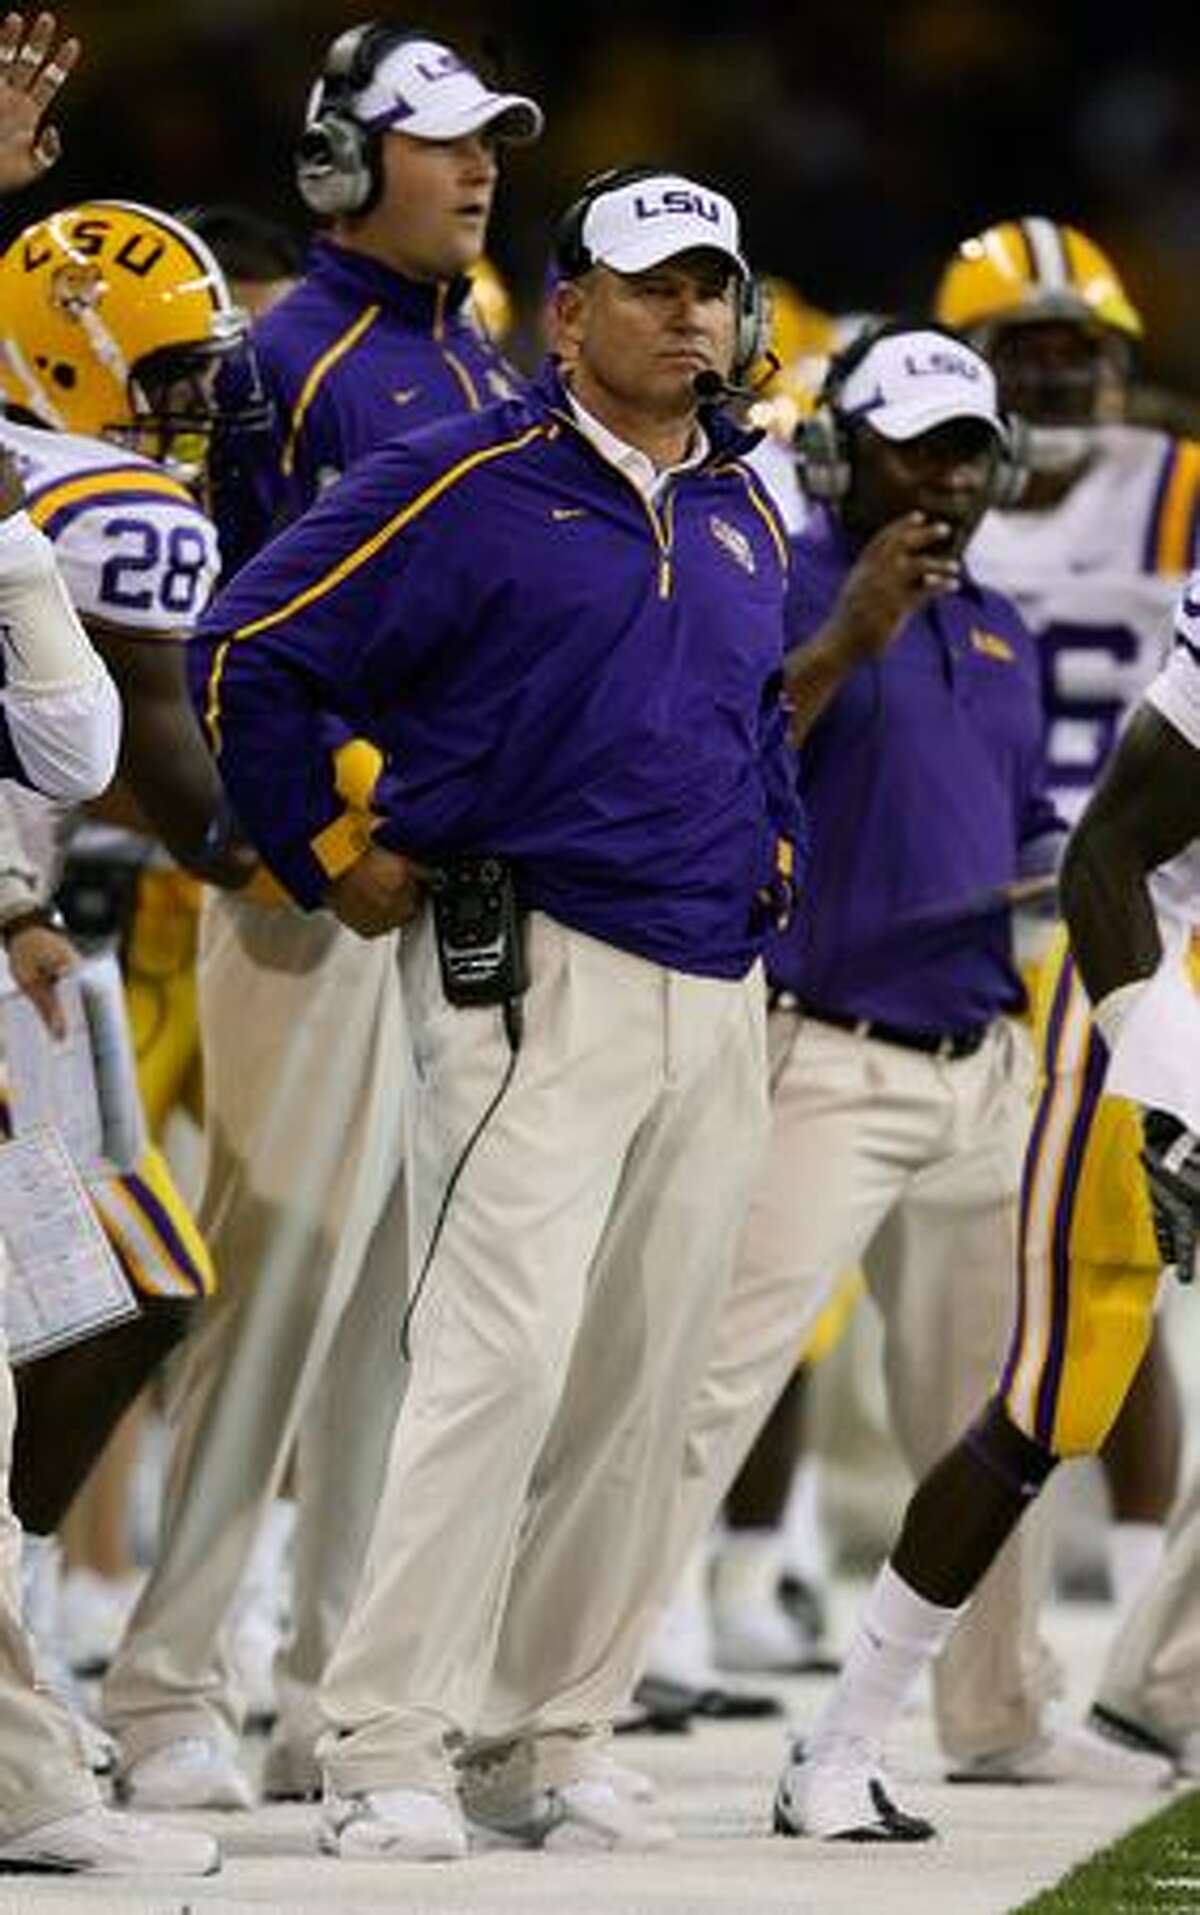 SEATTLE - SEPTEMBER 05: Head coach Les Miles of the LSU Tigers looks on from the sidelines during the game against the Washington Huskies on September 5, 2009 at Husky Stadium in Seattle, Washington. The Tigers defeated the Huskies 31-23.